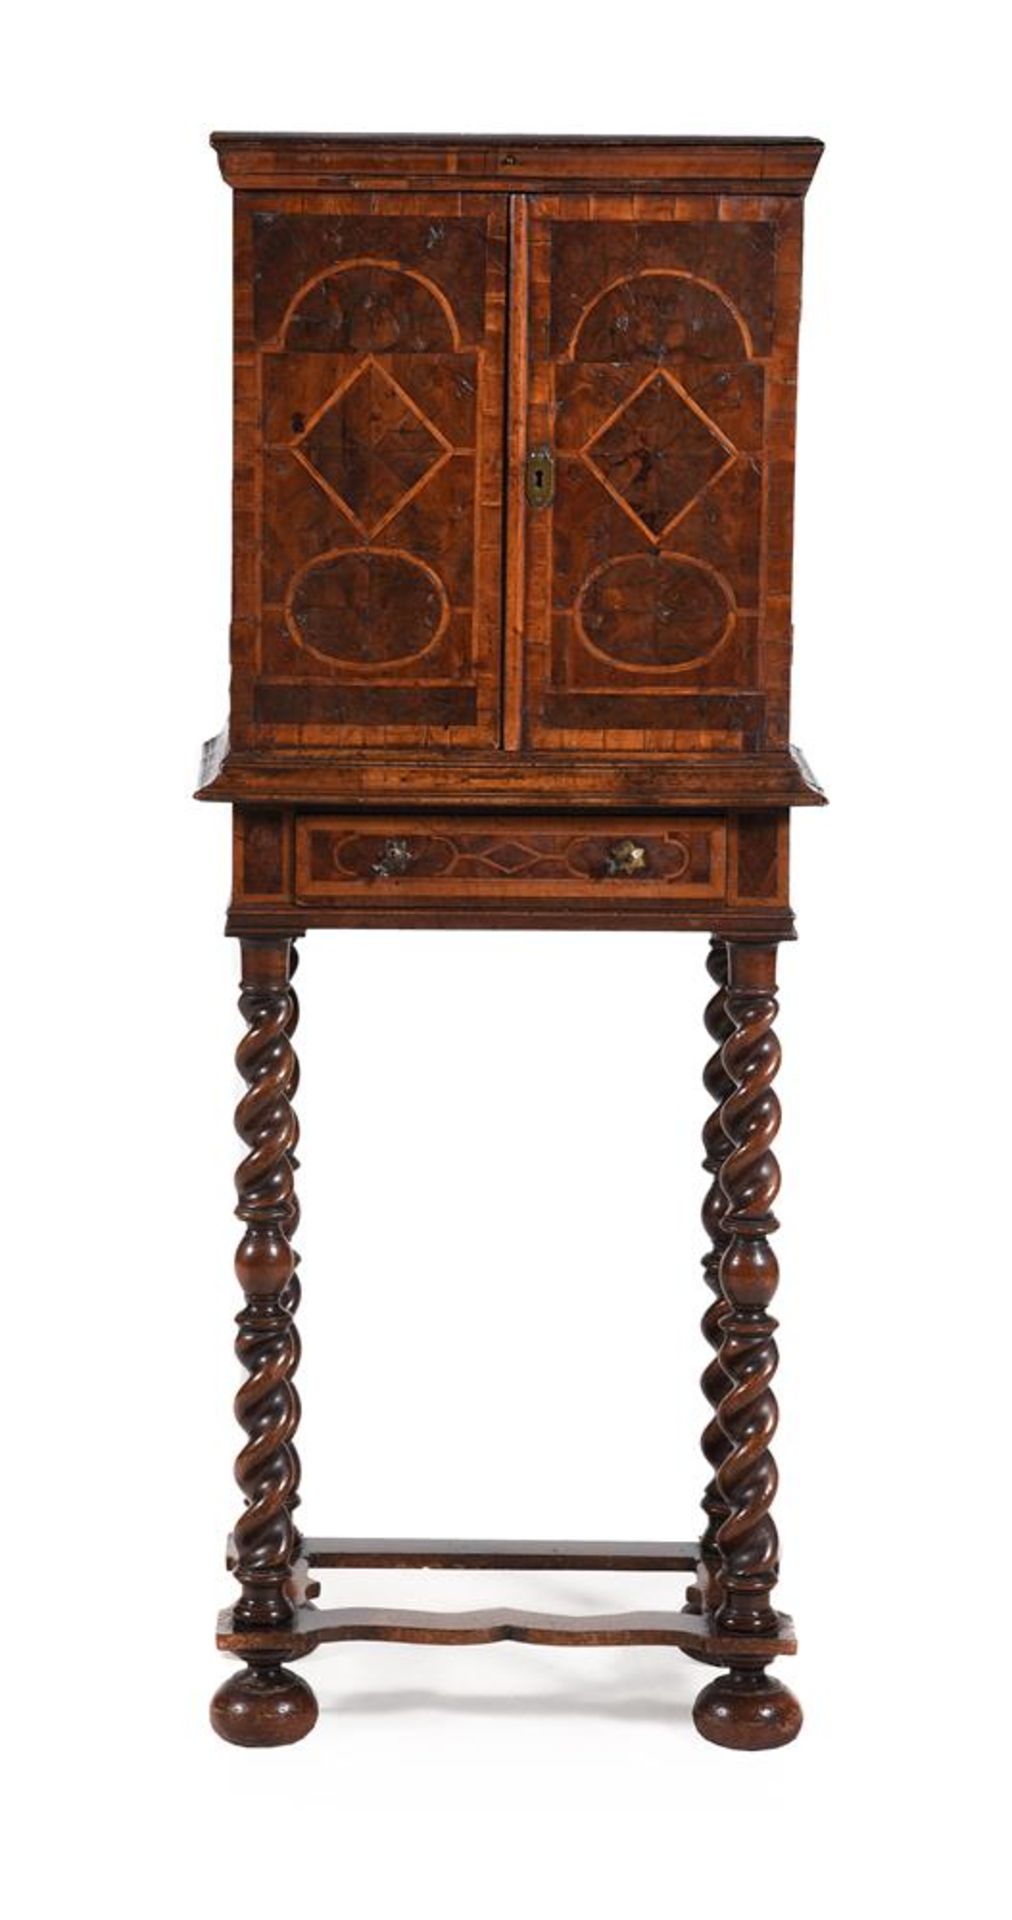 A CHARLES II YEW OYSTER VENEERED AND HOLLY BANDED CABINET